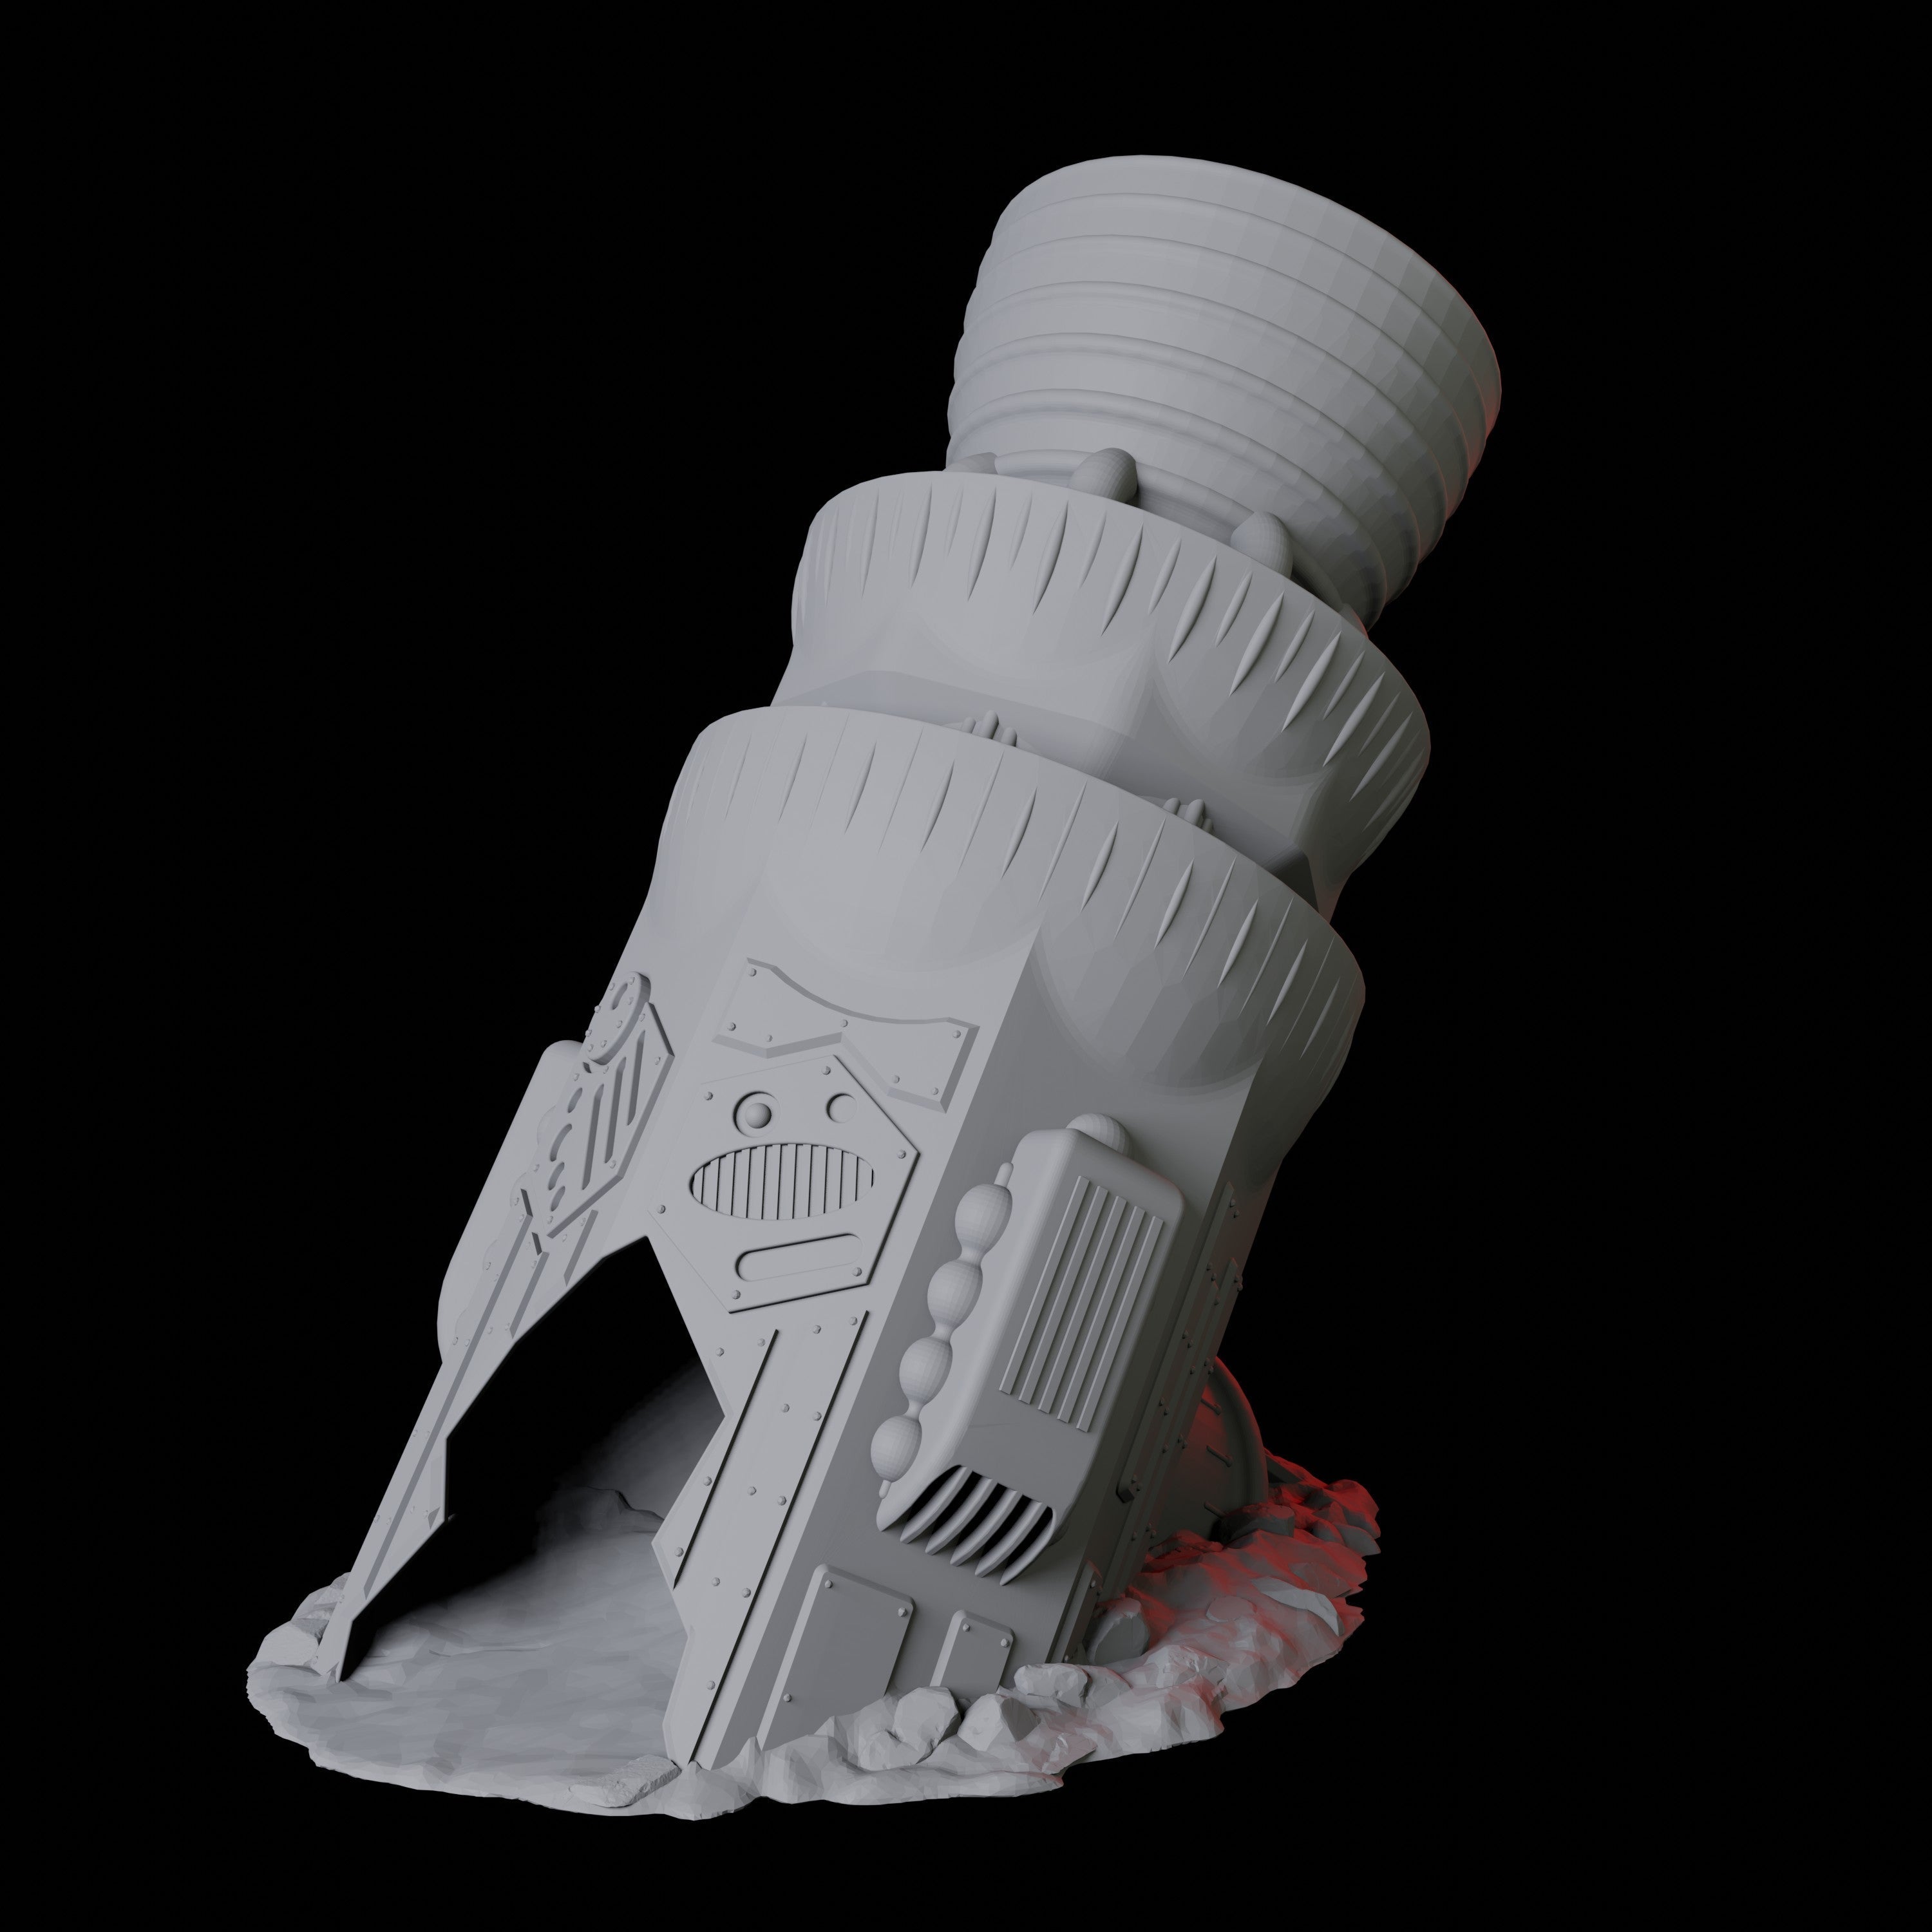 Space Ship Dice Tower Miniature for Dungeons and Dragons